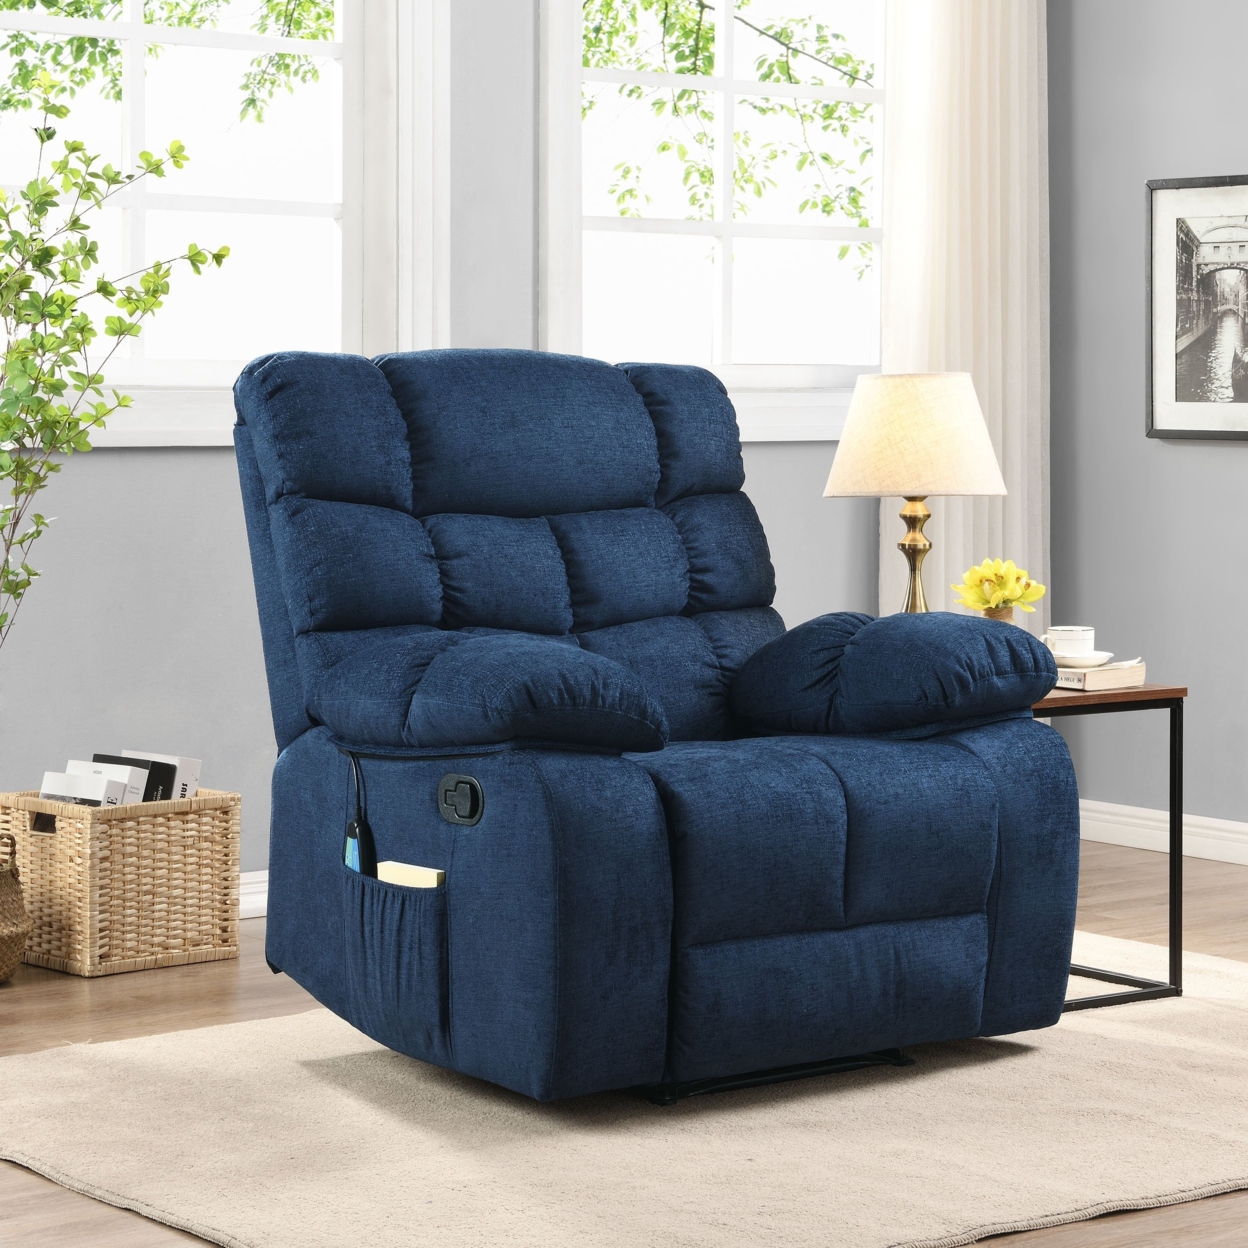 Conyers Contemporary Pillow Tufted Massage Recliner - Black/navy Blue